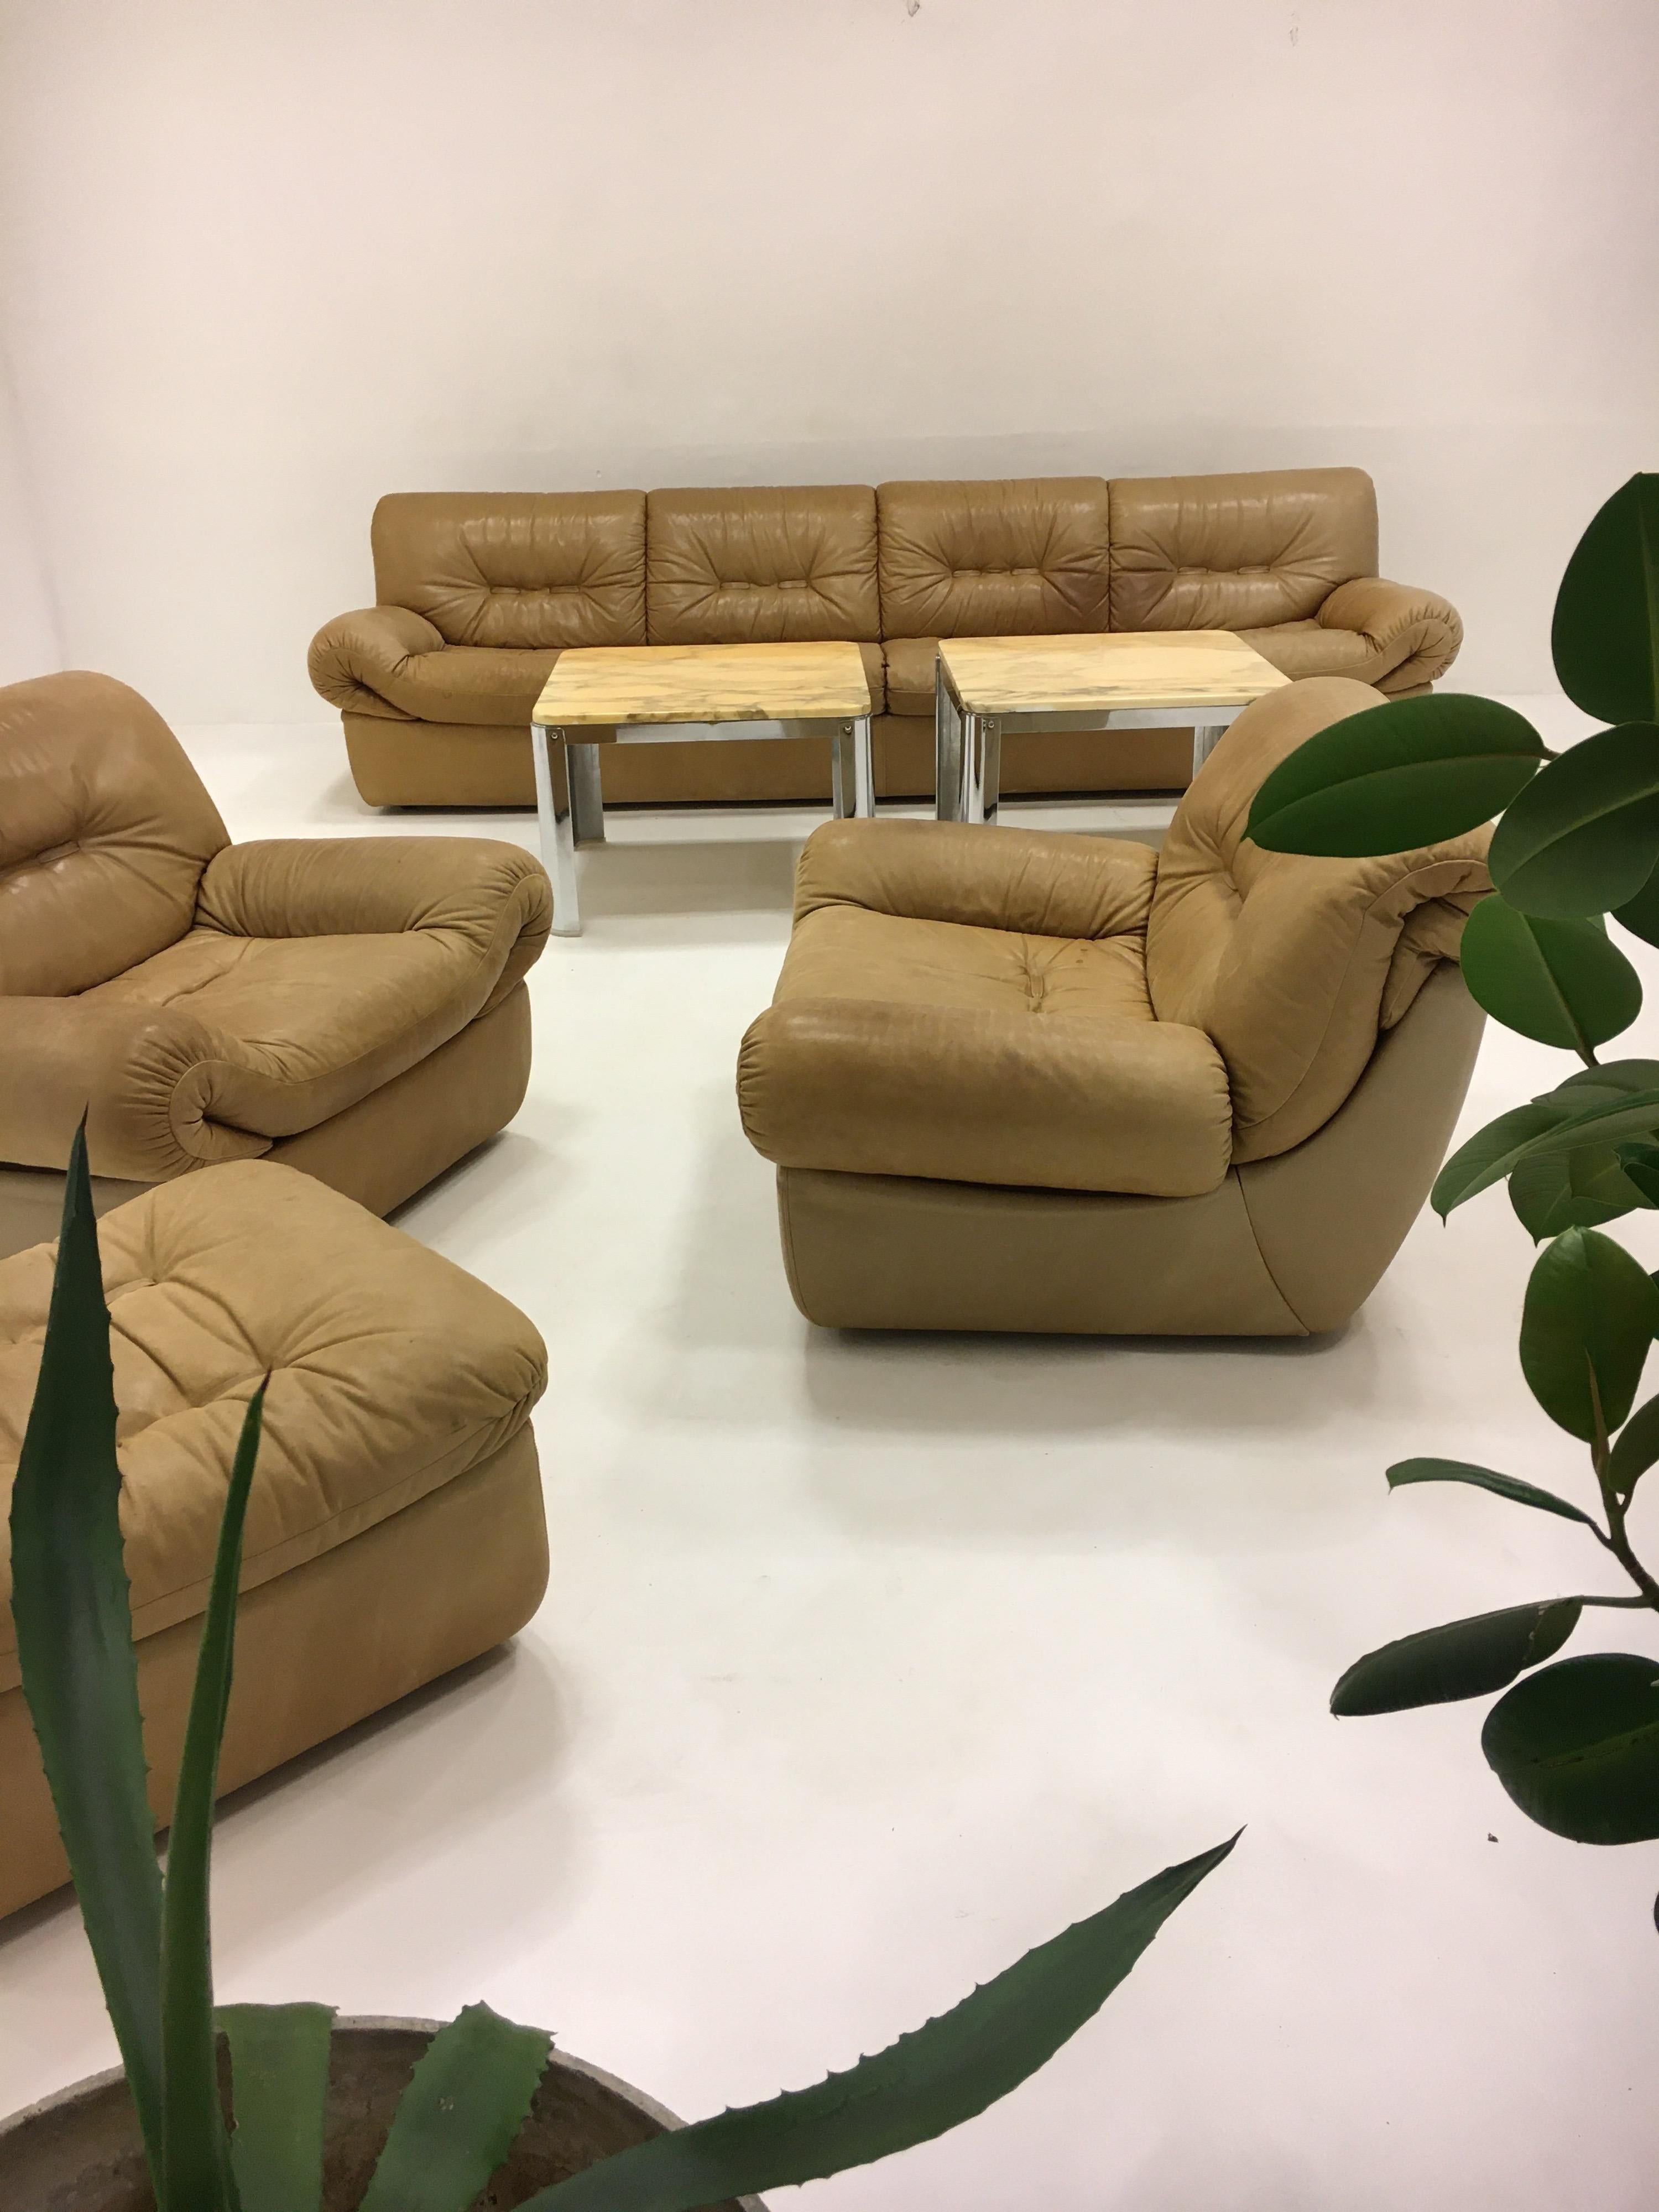 Wittmann, Model 'Chairman' Sofa Suite Living Room Set, Patinated Leather, 1971 For Sale 12